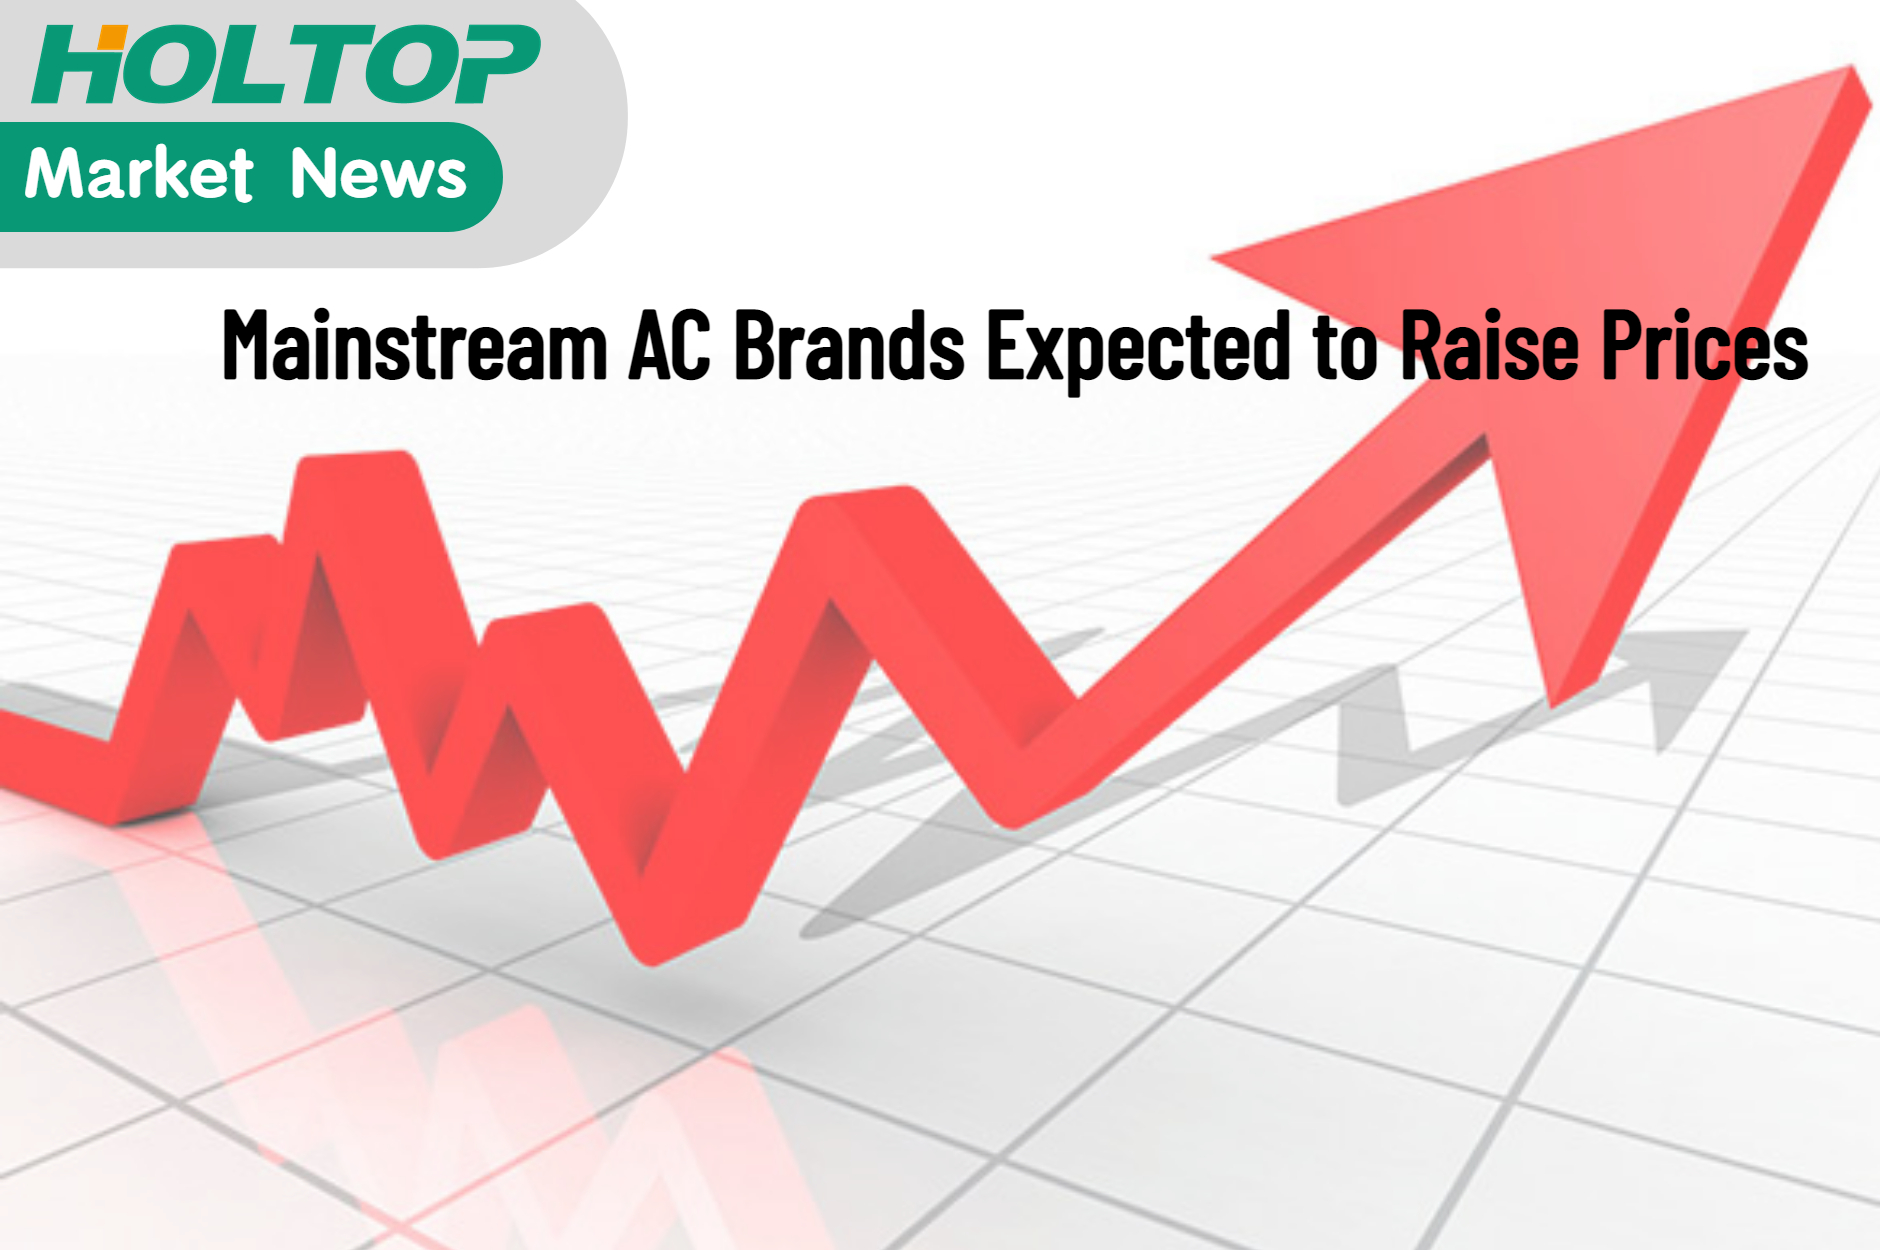 Mainstream AC Brands Expected to Raise Prices